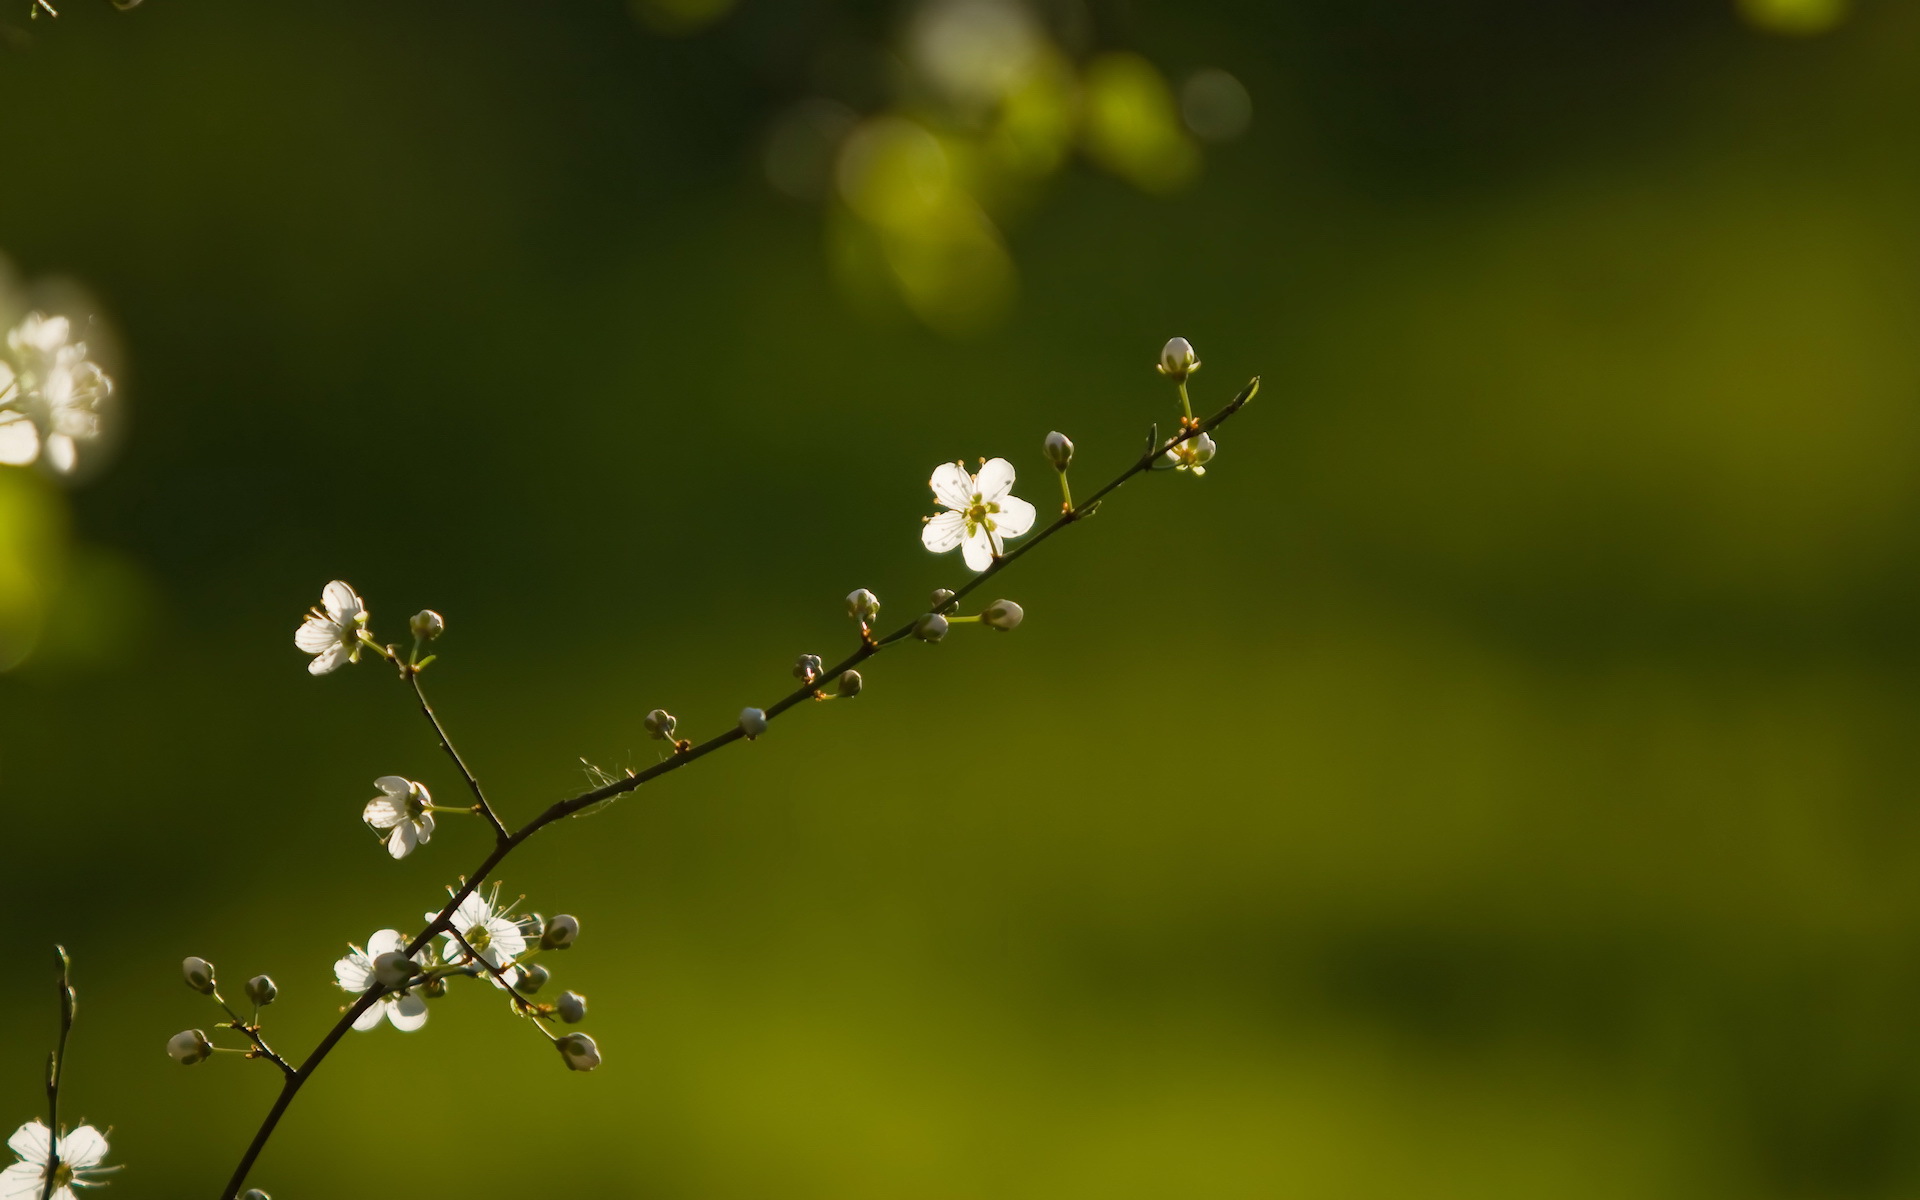 Nature___Seasons___Spring_Spring_flowers_on_a_branch_098010_.jpg